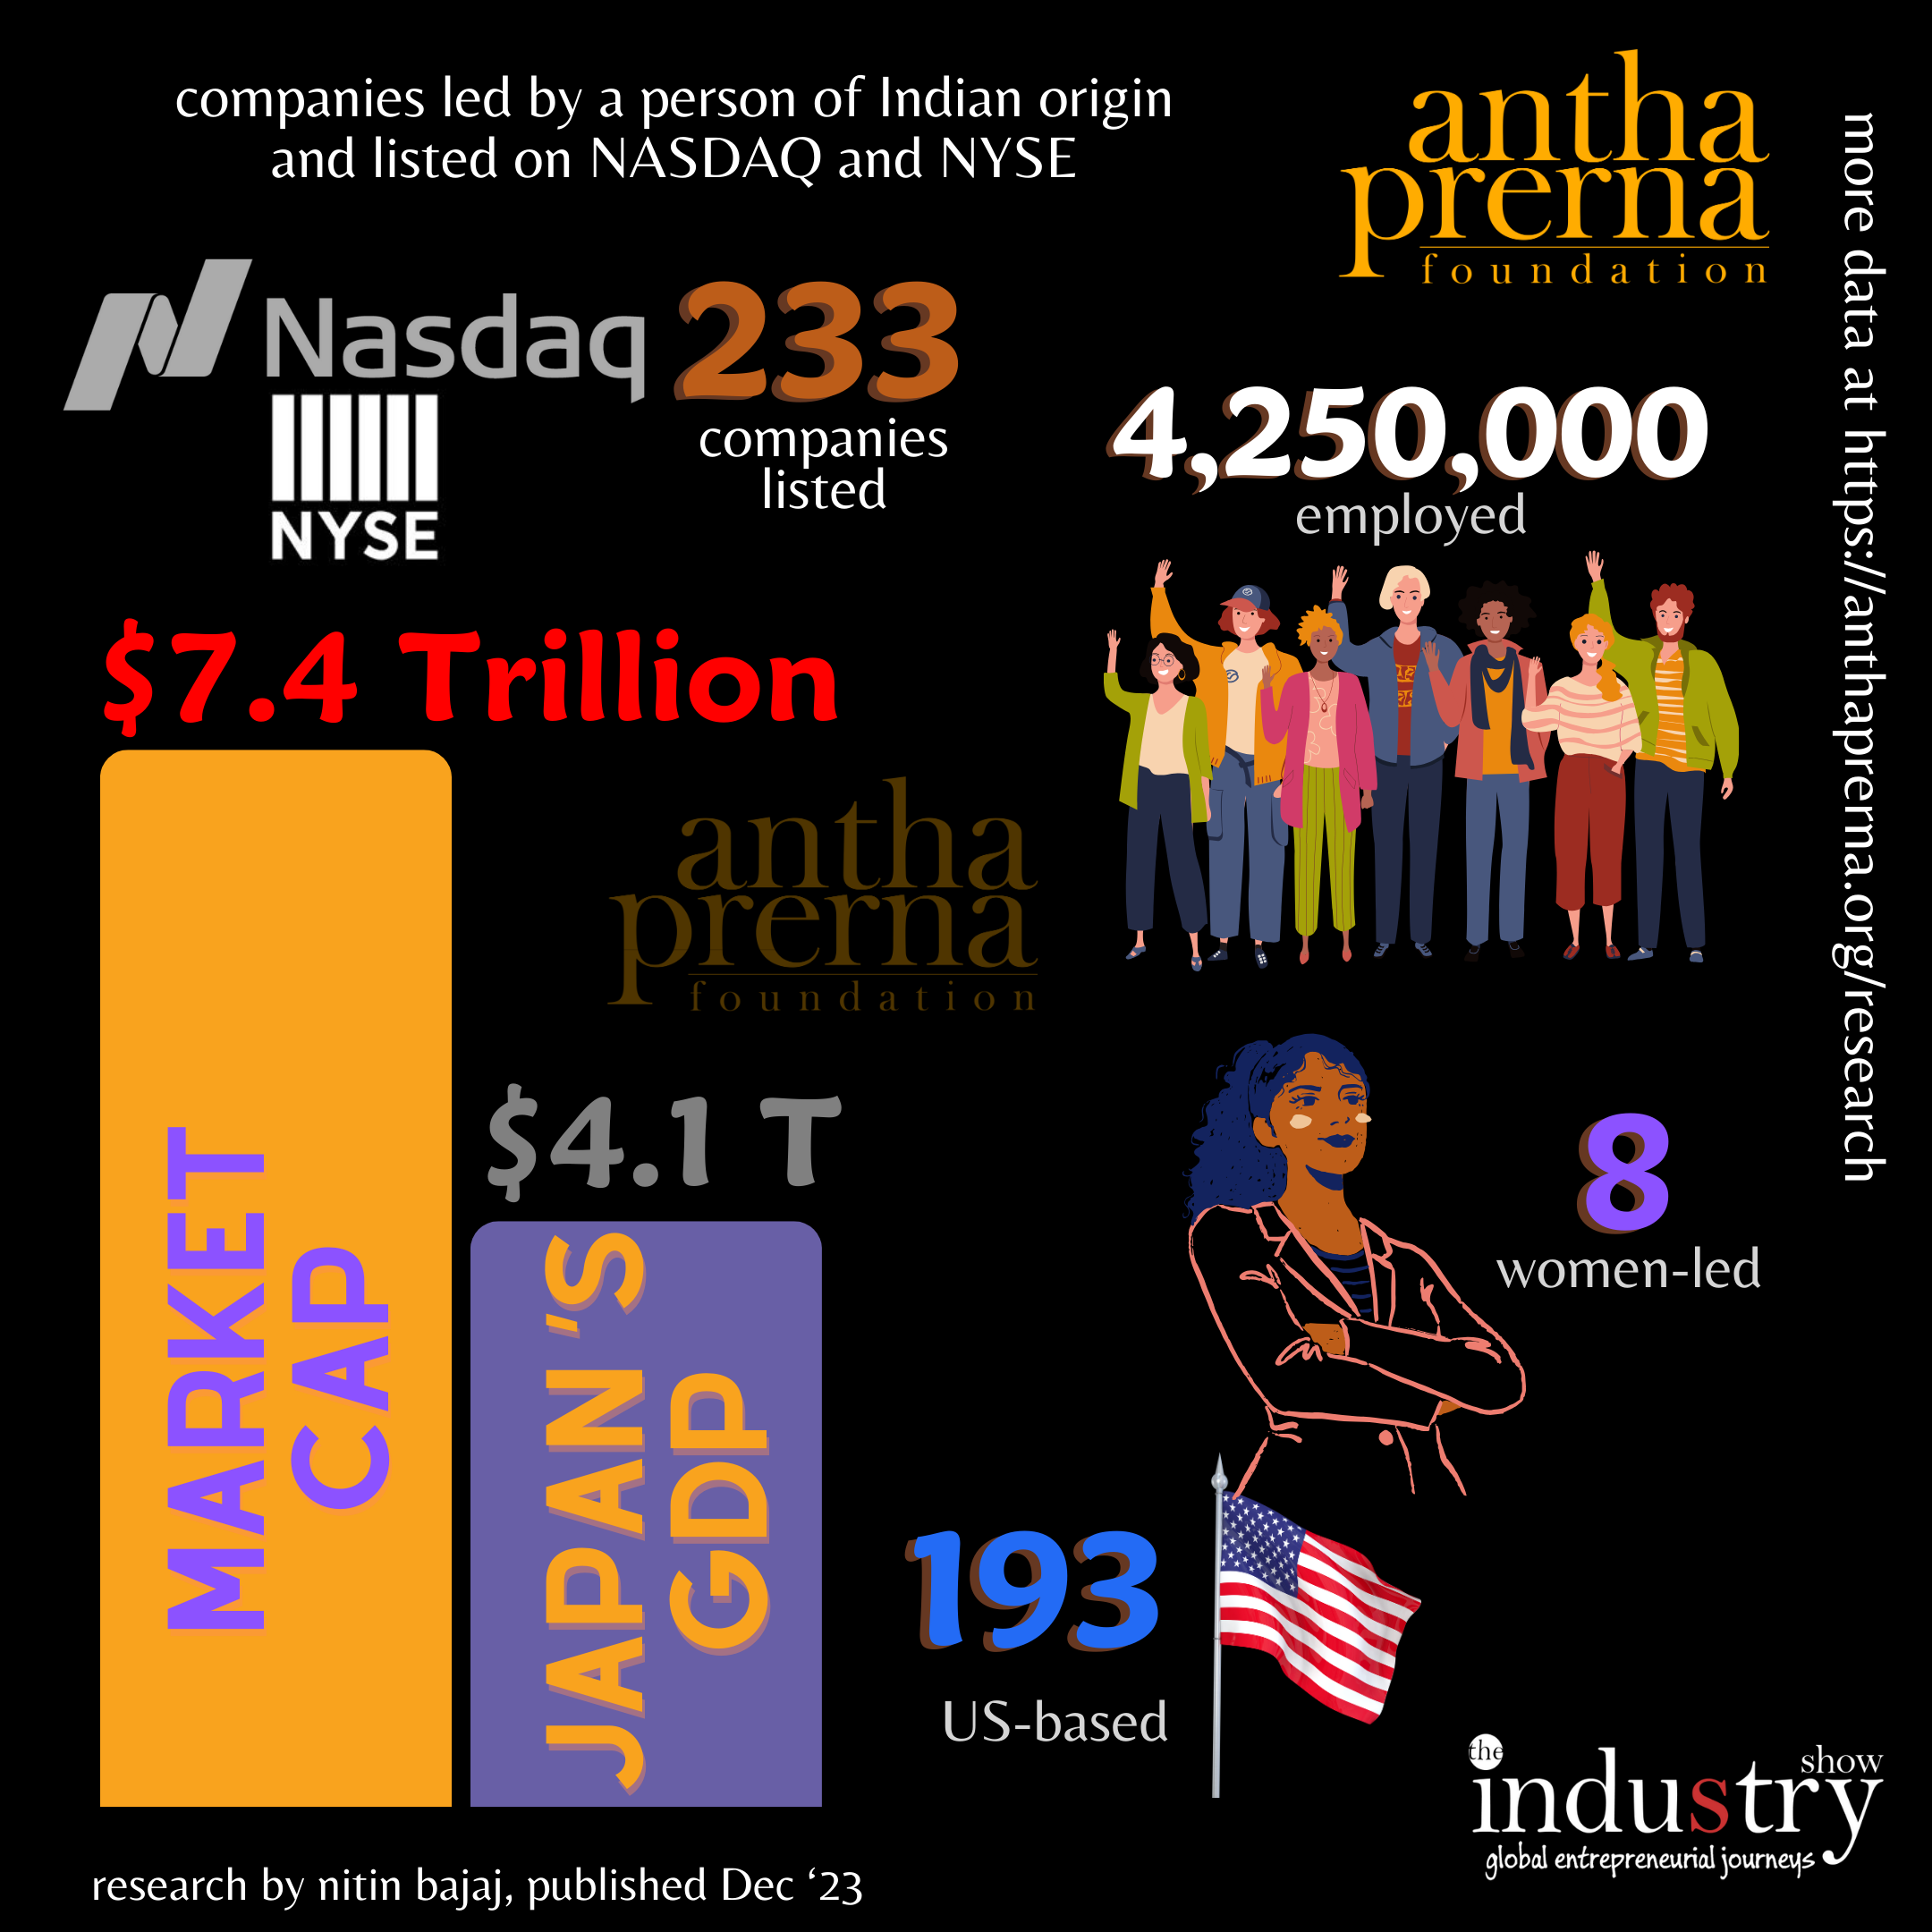 companies led by a person of Indian origin and listed on NASDAQ and NYSE